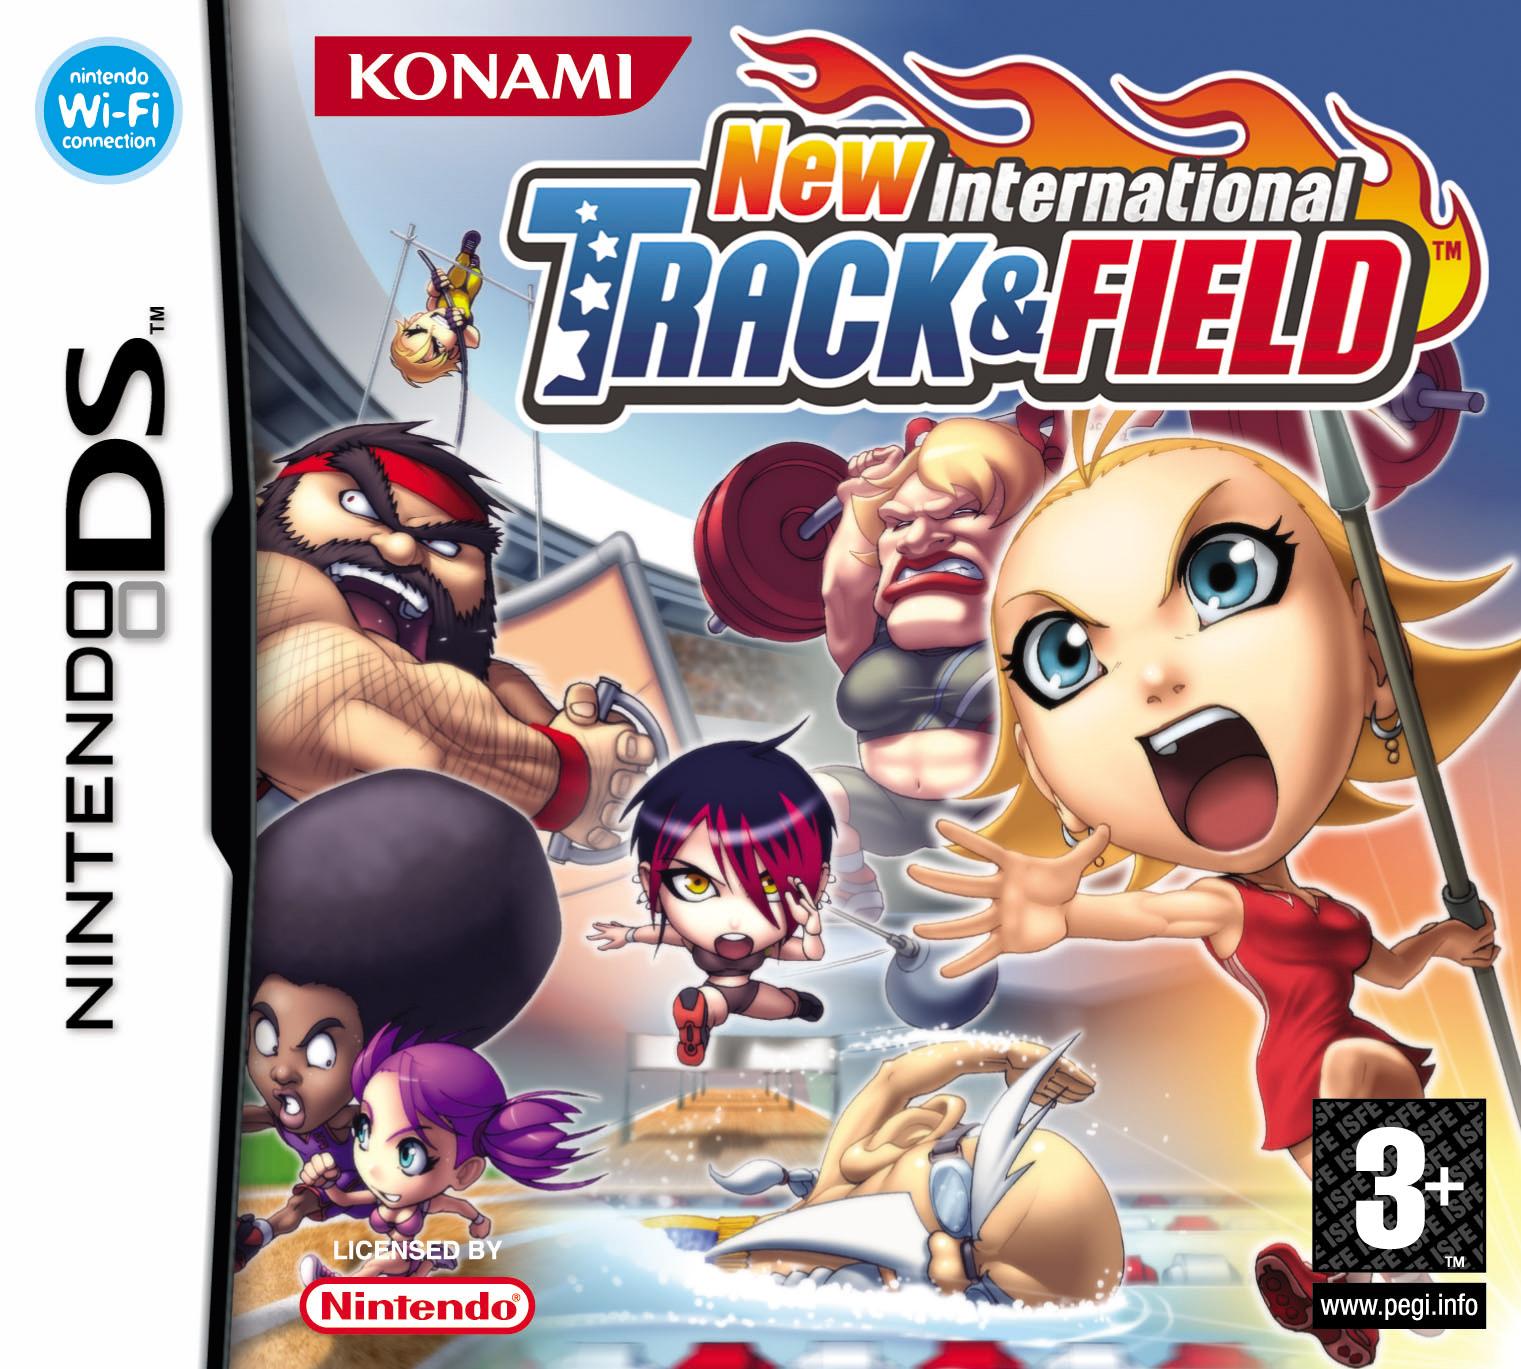 New International Track And Field for NINTENDODS to rent